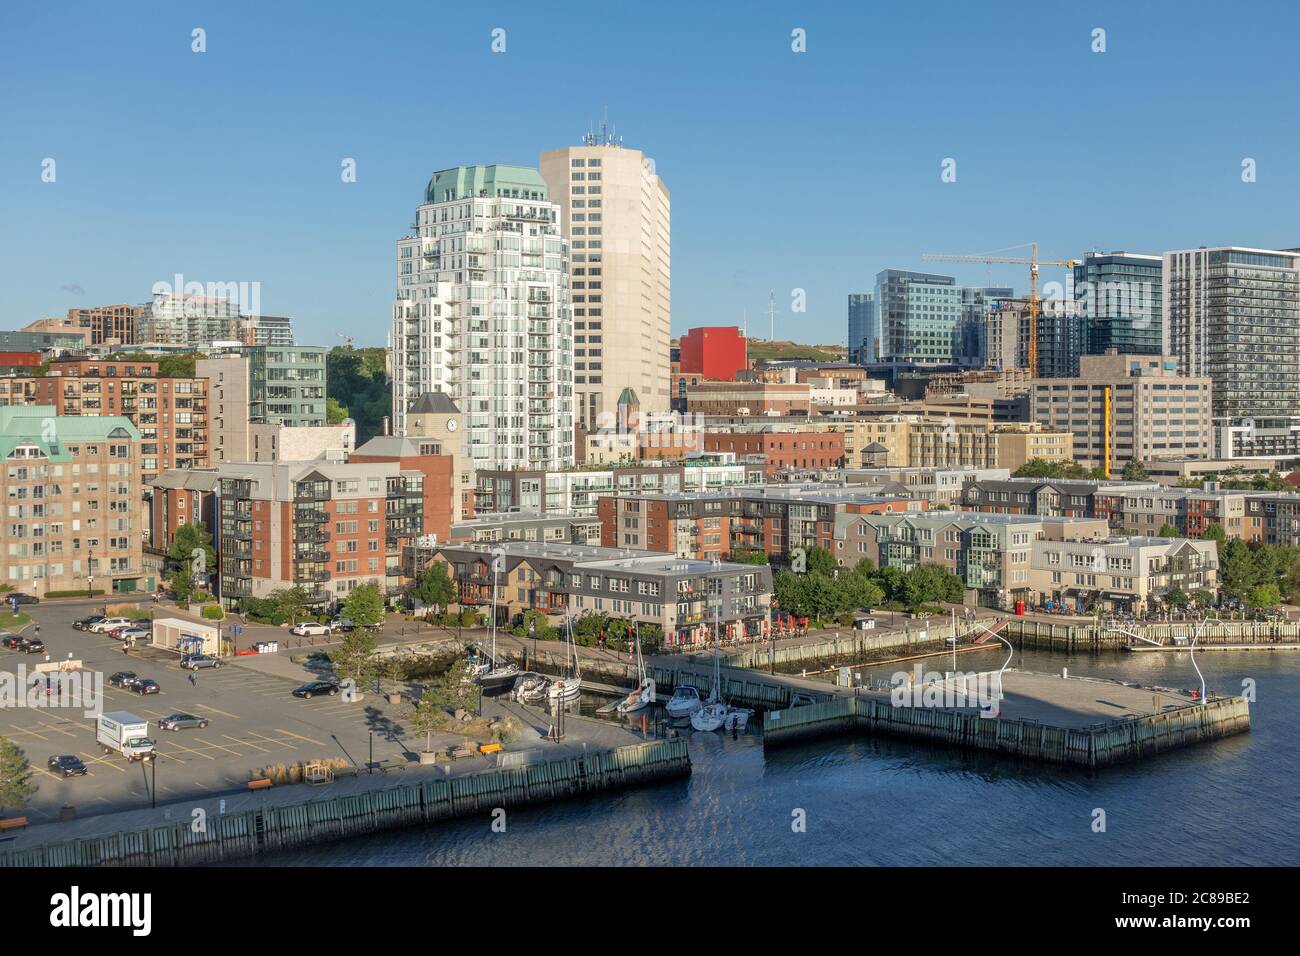 Early Morning Halifax Nova Scotia, Canada City Centre Skyscrapers Downtown  Waterfront Boardwalk Canadian Port Halifax harbour Stock Photo